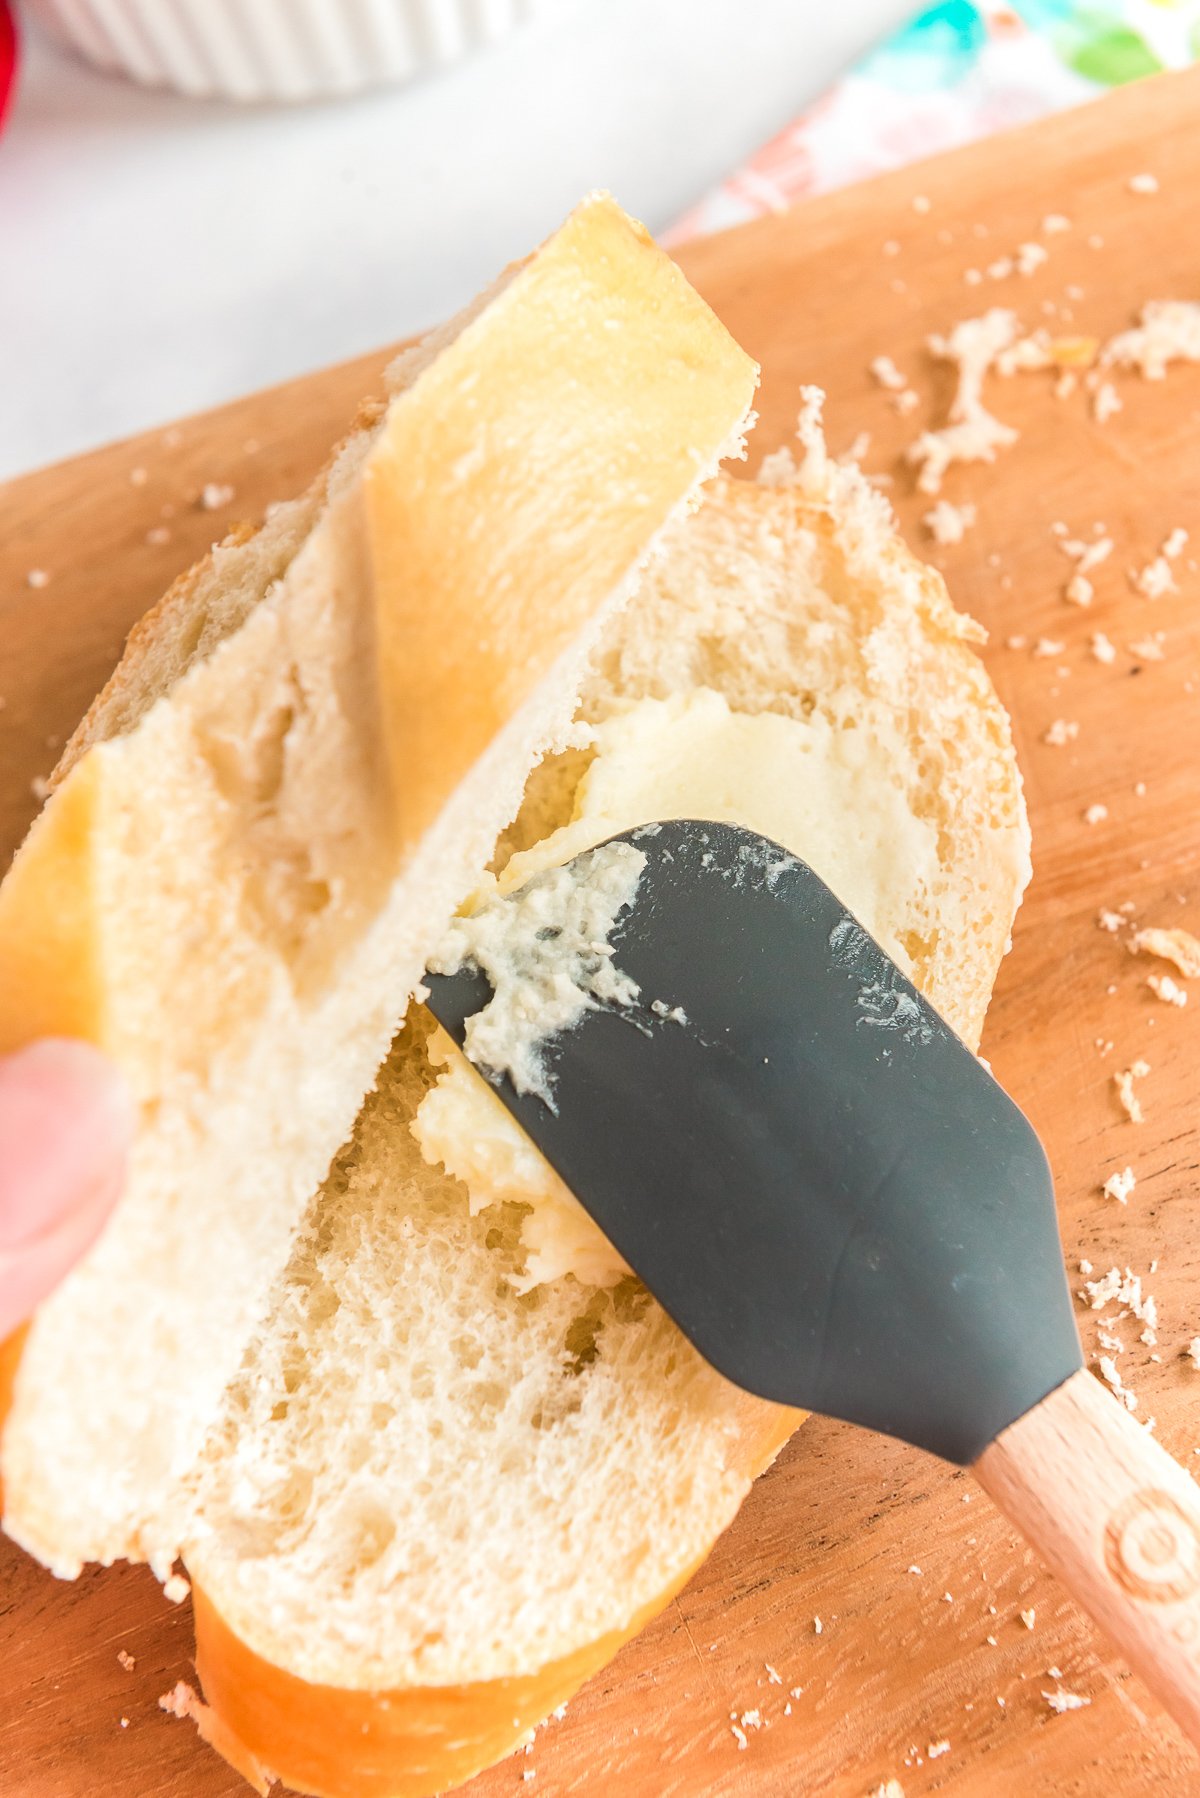 Mascarpone cheese filling being spread on french bread with a rubber spatula.